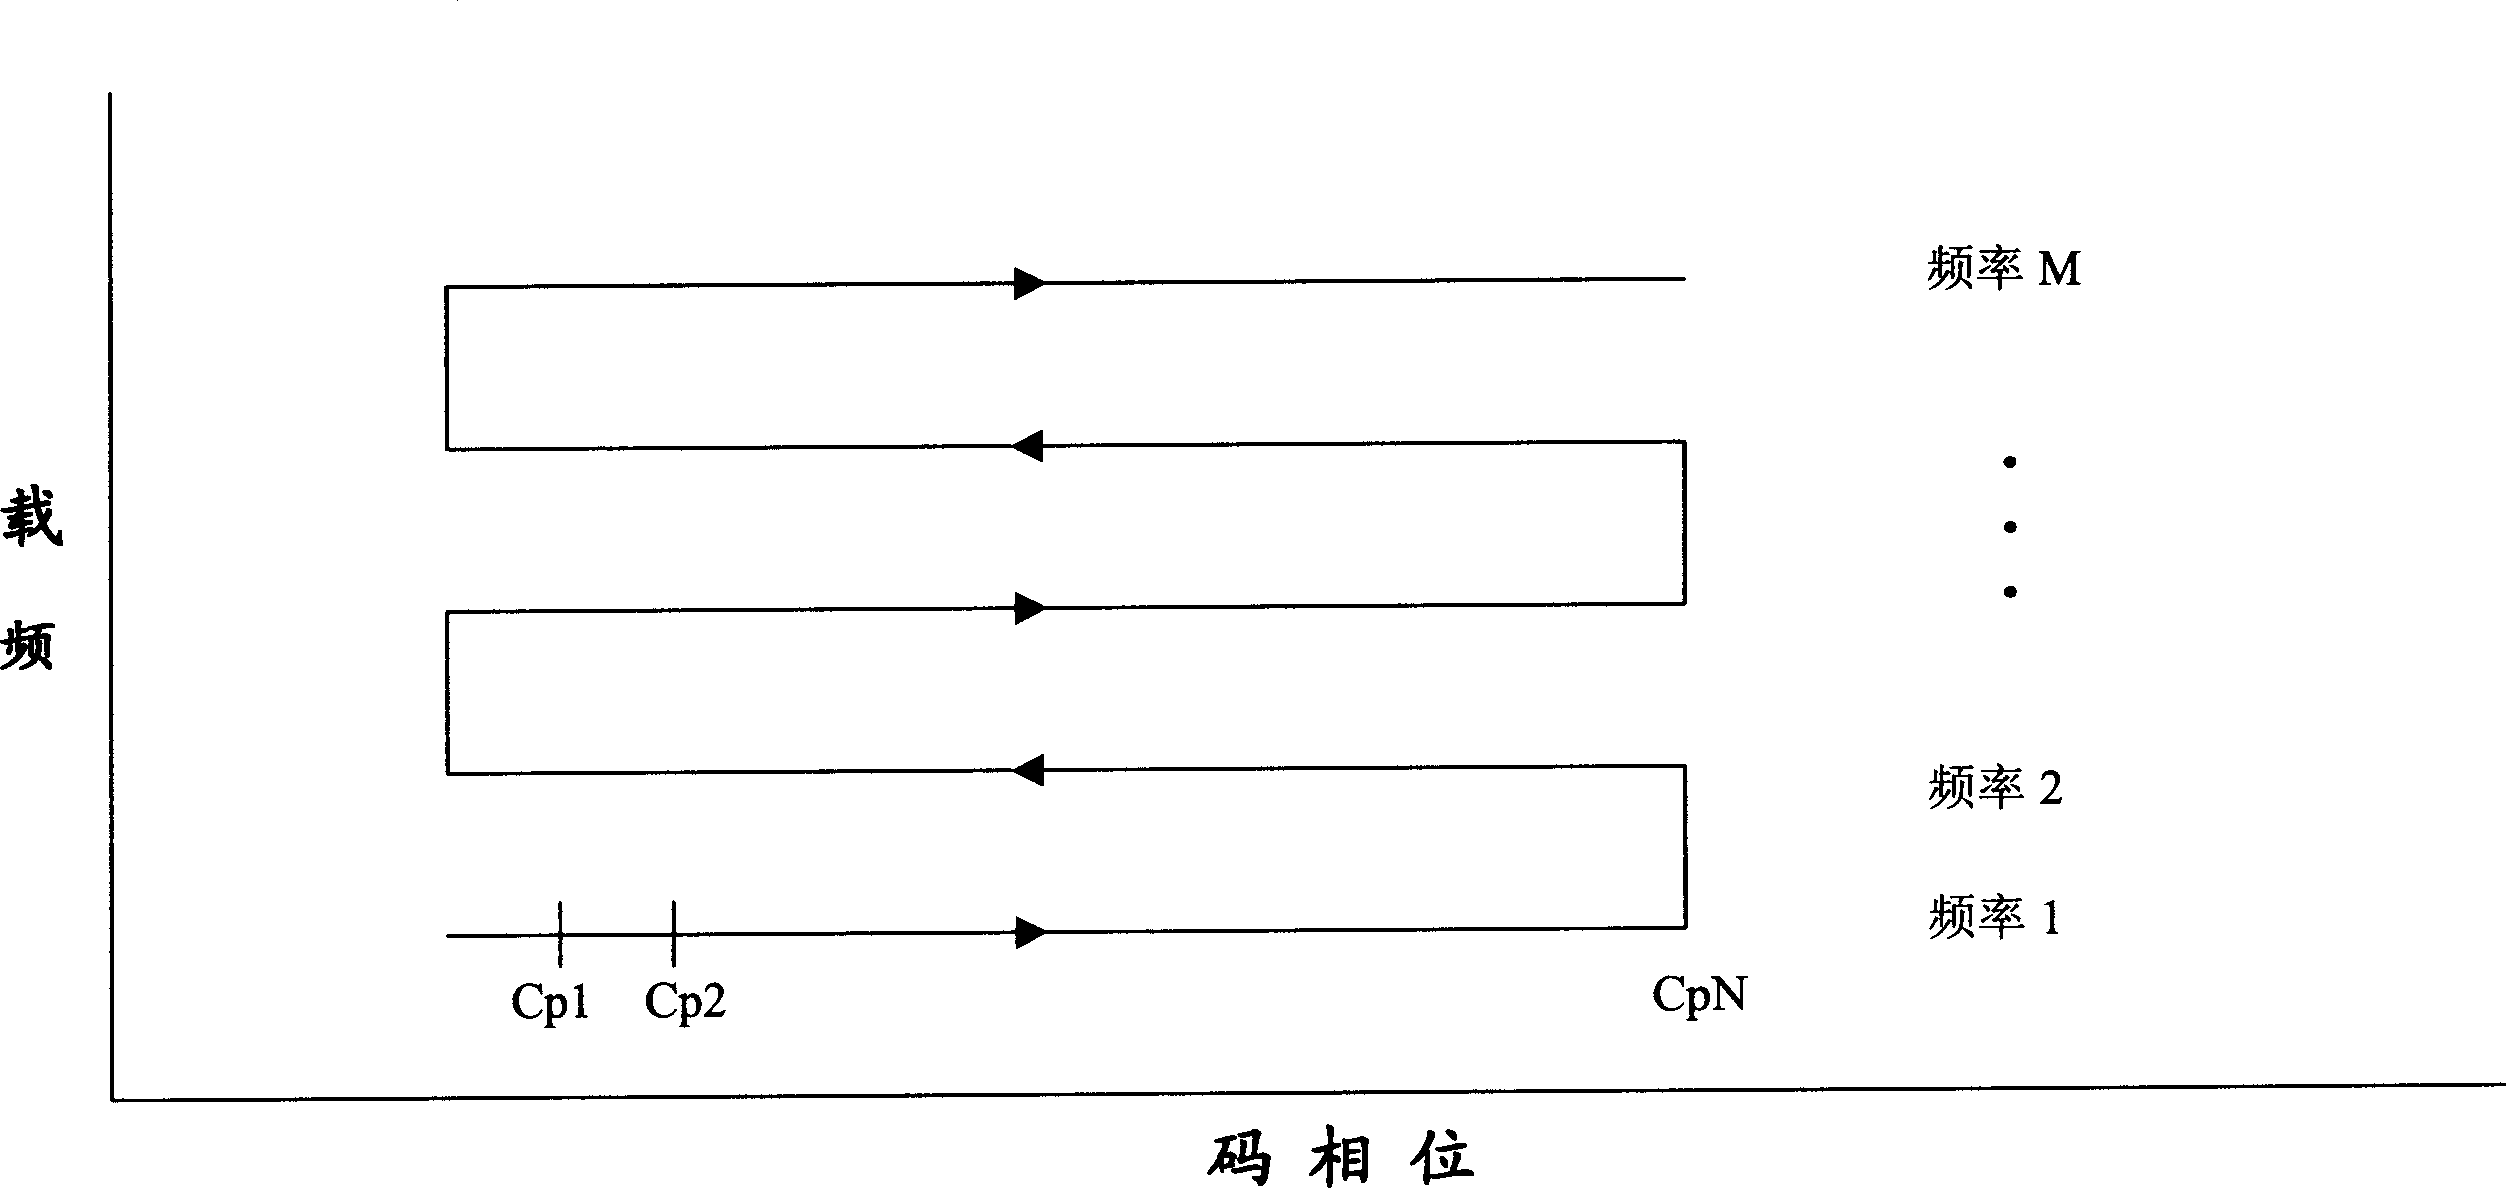 System and method for fast code phase and carrier frequency acquisition in GPS receiver